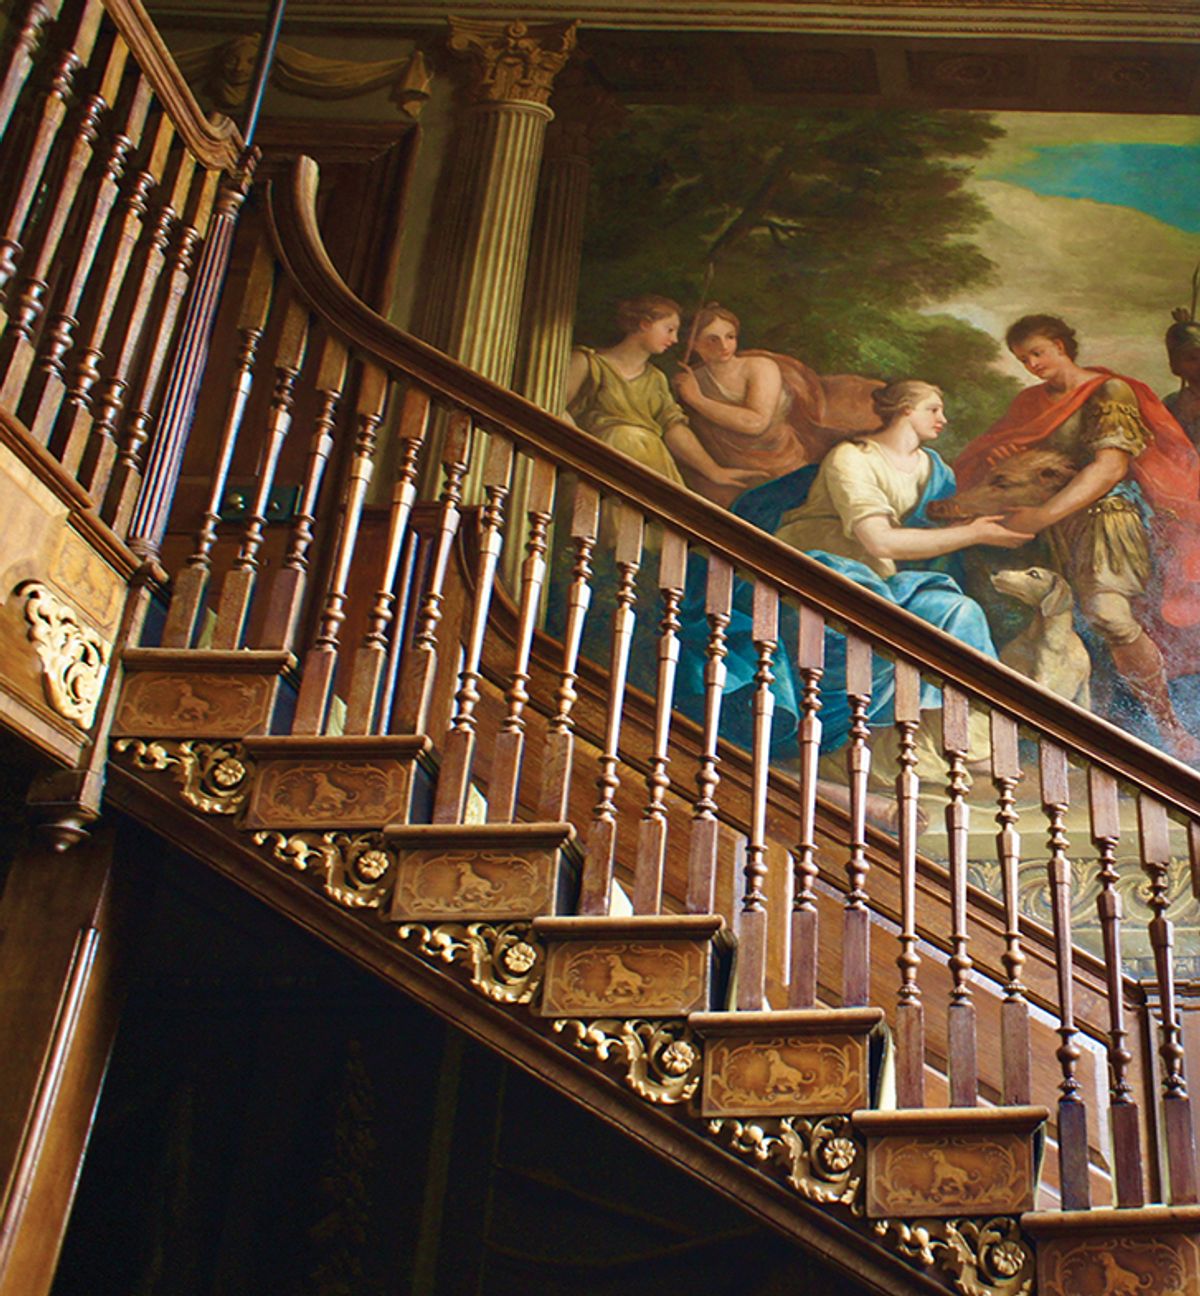 James Thornhill’s mural in the staircase hall at Sherborne House has been restored
Samuel Kennedy
